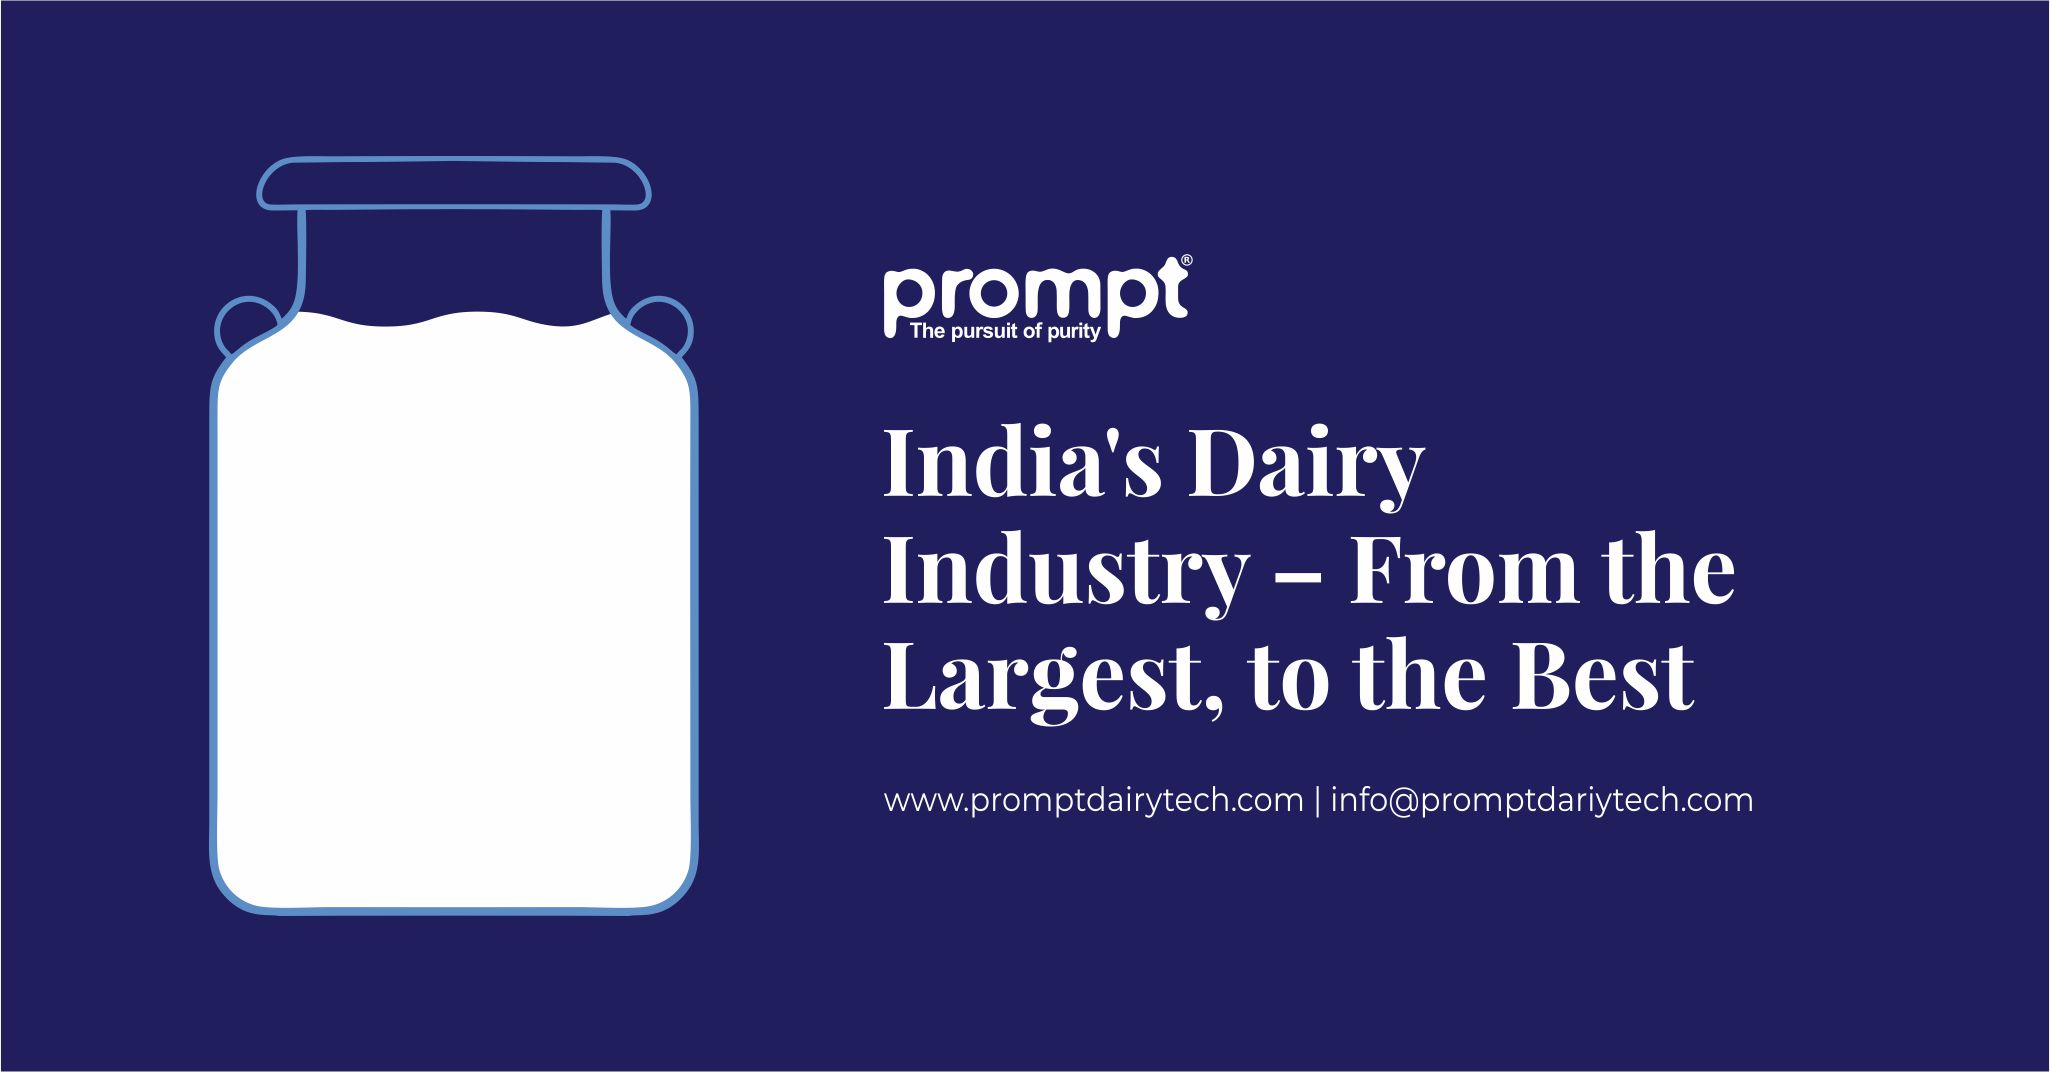 India's Dairy Industry – From the Largest, to the Best